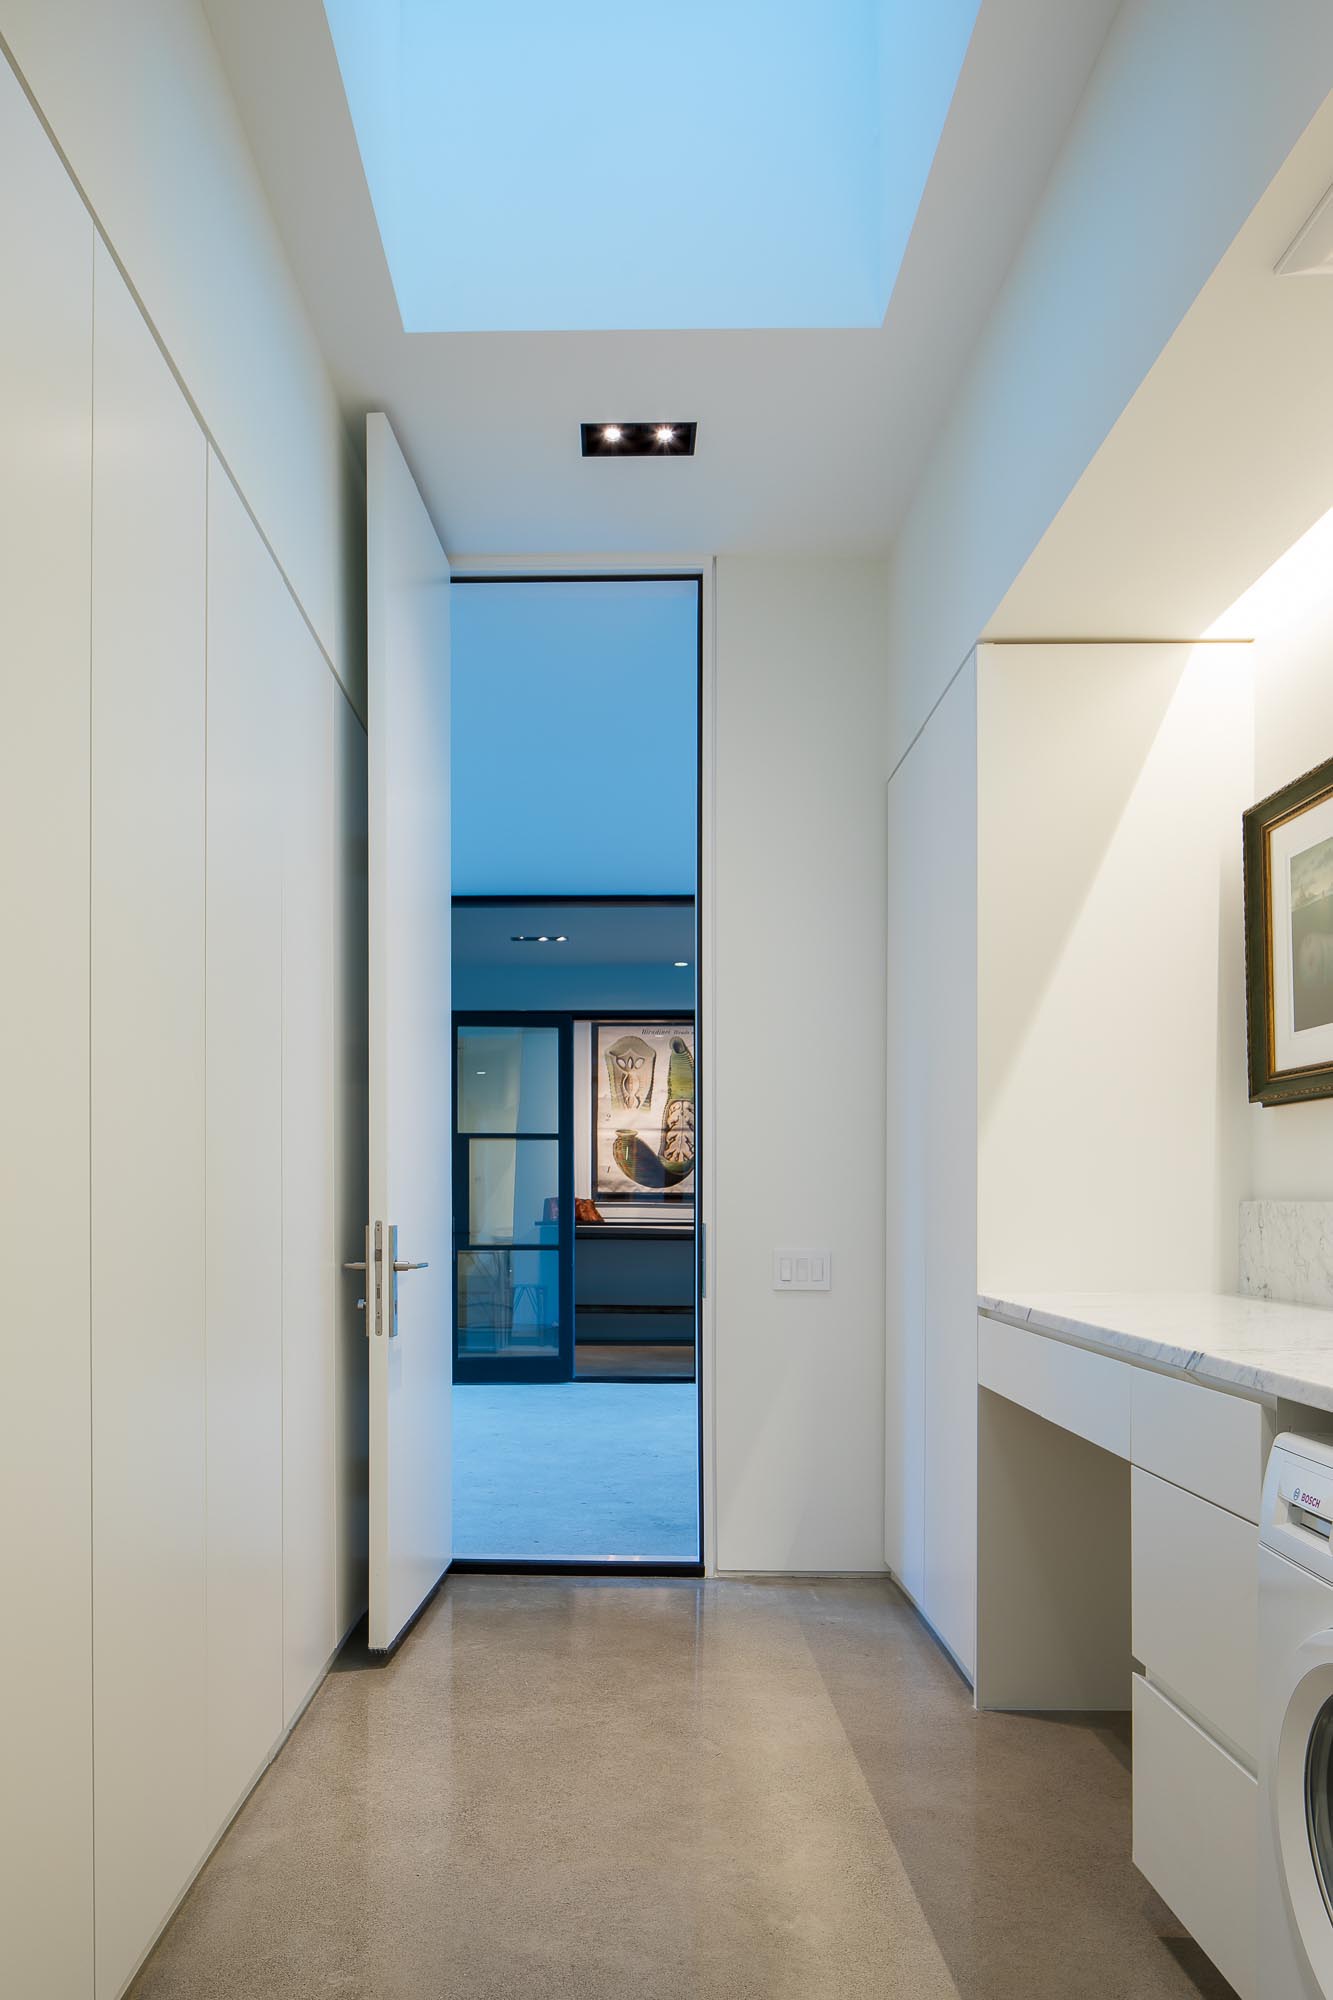 A modern white laundry room with concrete floors.